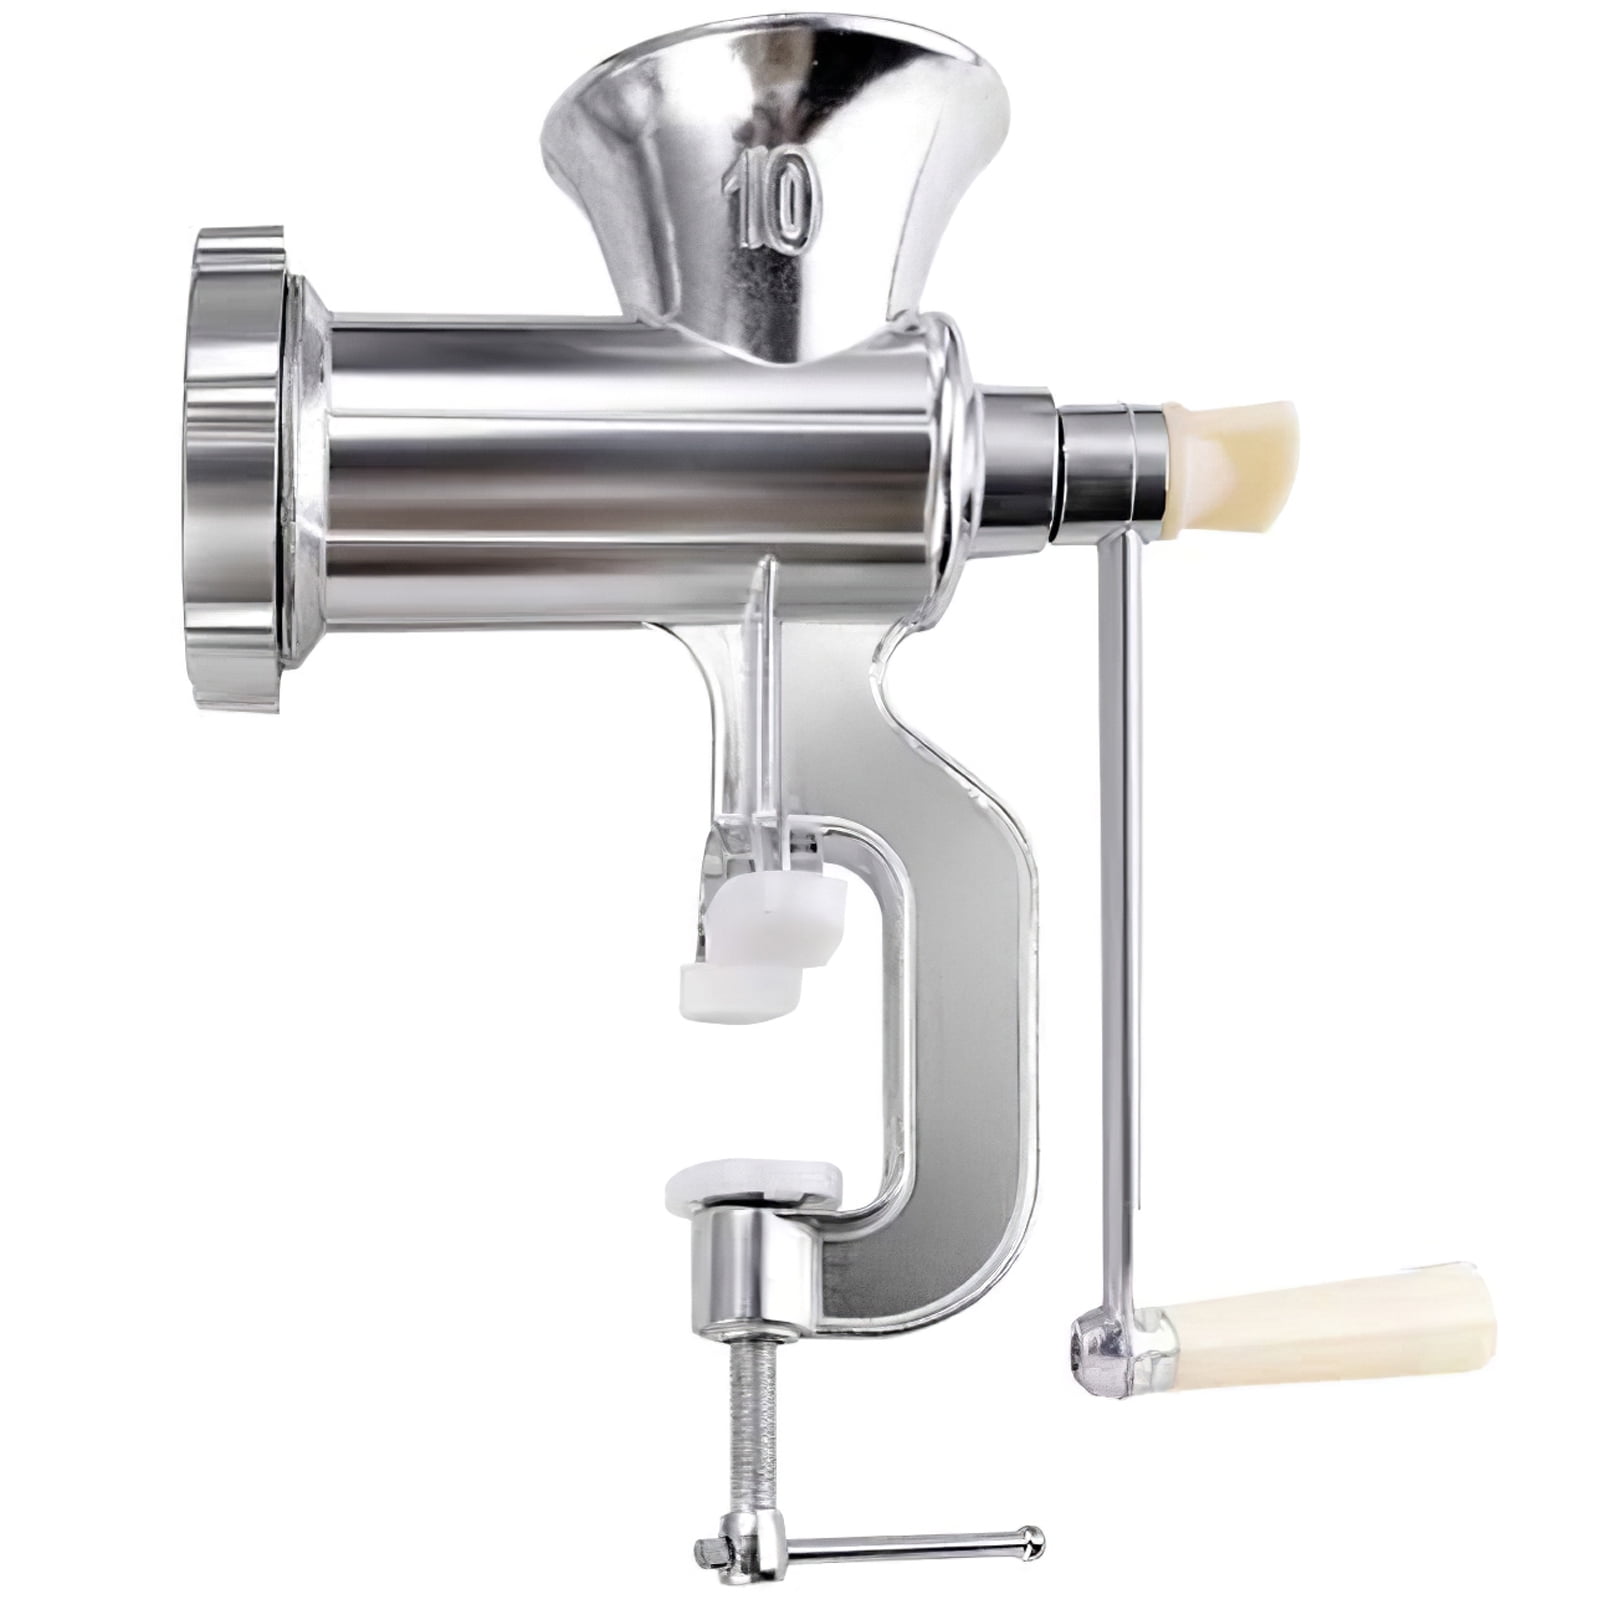 Manual Meat Grinder, 3-in-1 Hand Grinder, Reusable And Durable Hand Crank  Meat Vegetables Pepper Mincer Grinding Machine WIth Powerful Suction